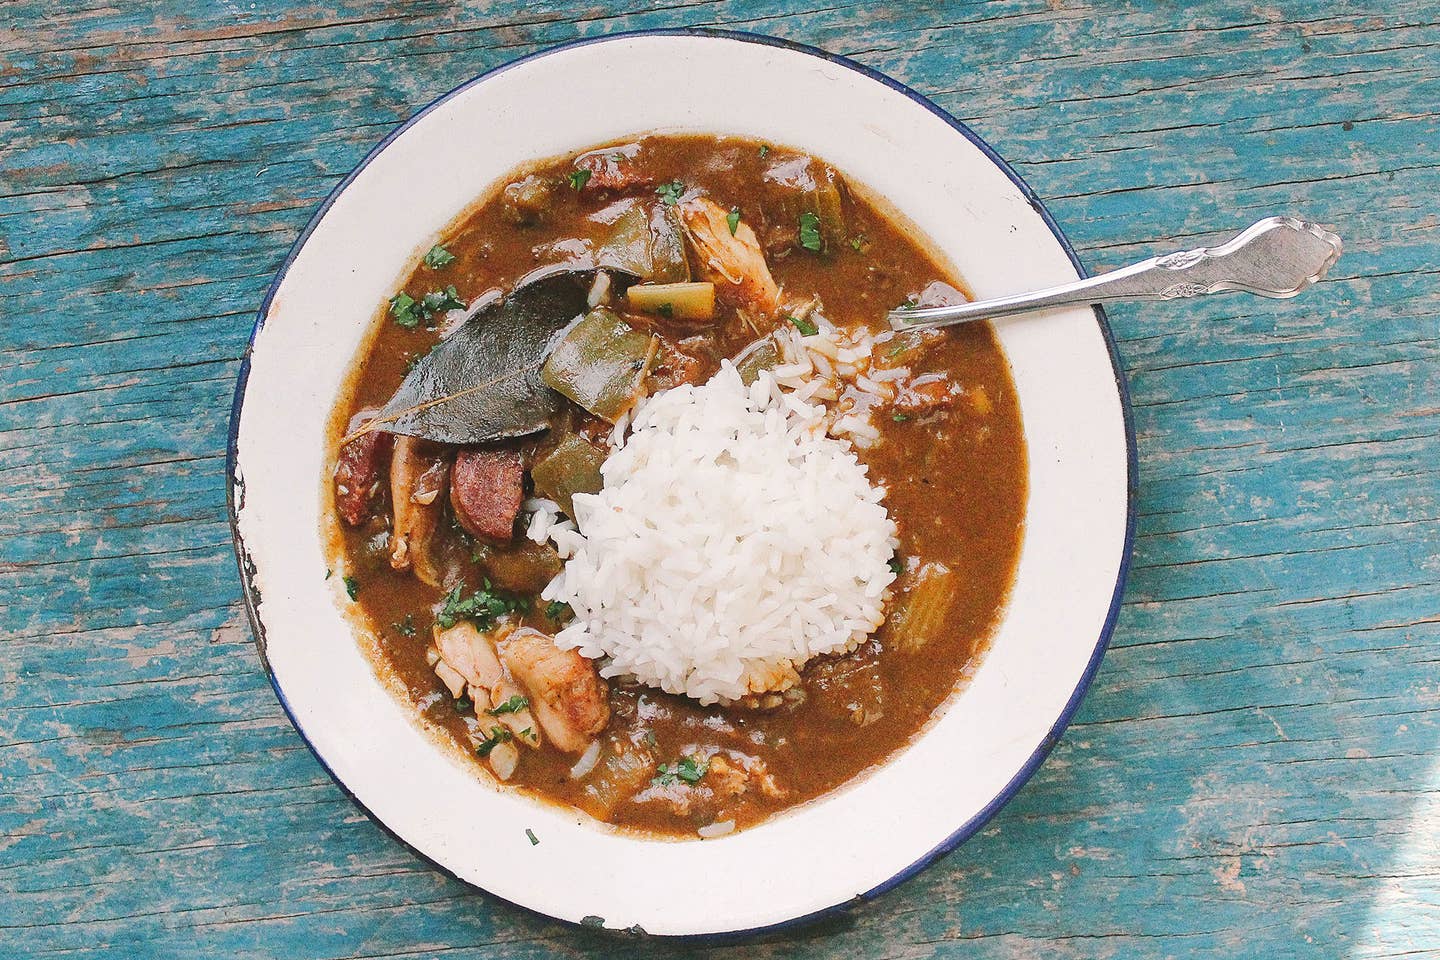 Channel the ‘90s This Soup Season by Making a Big Pot of Gumbo